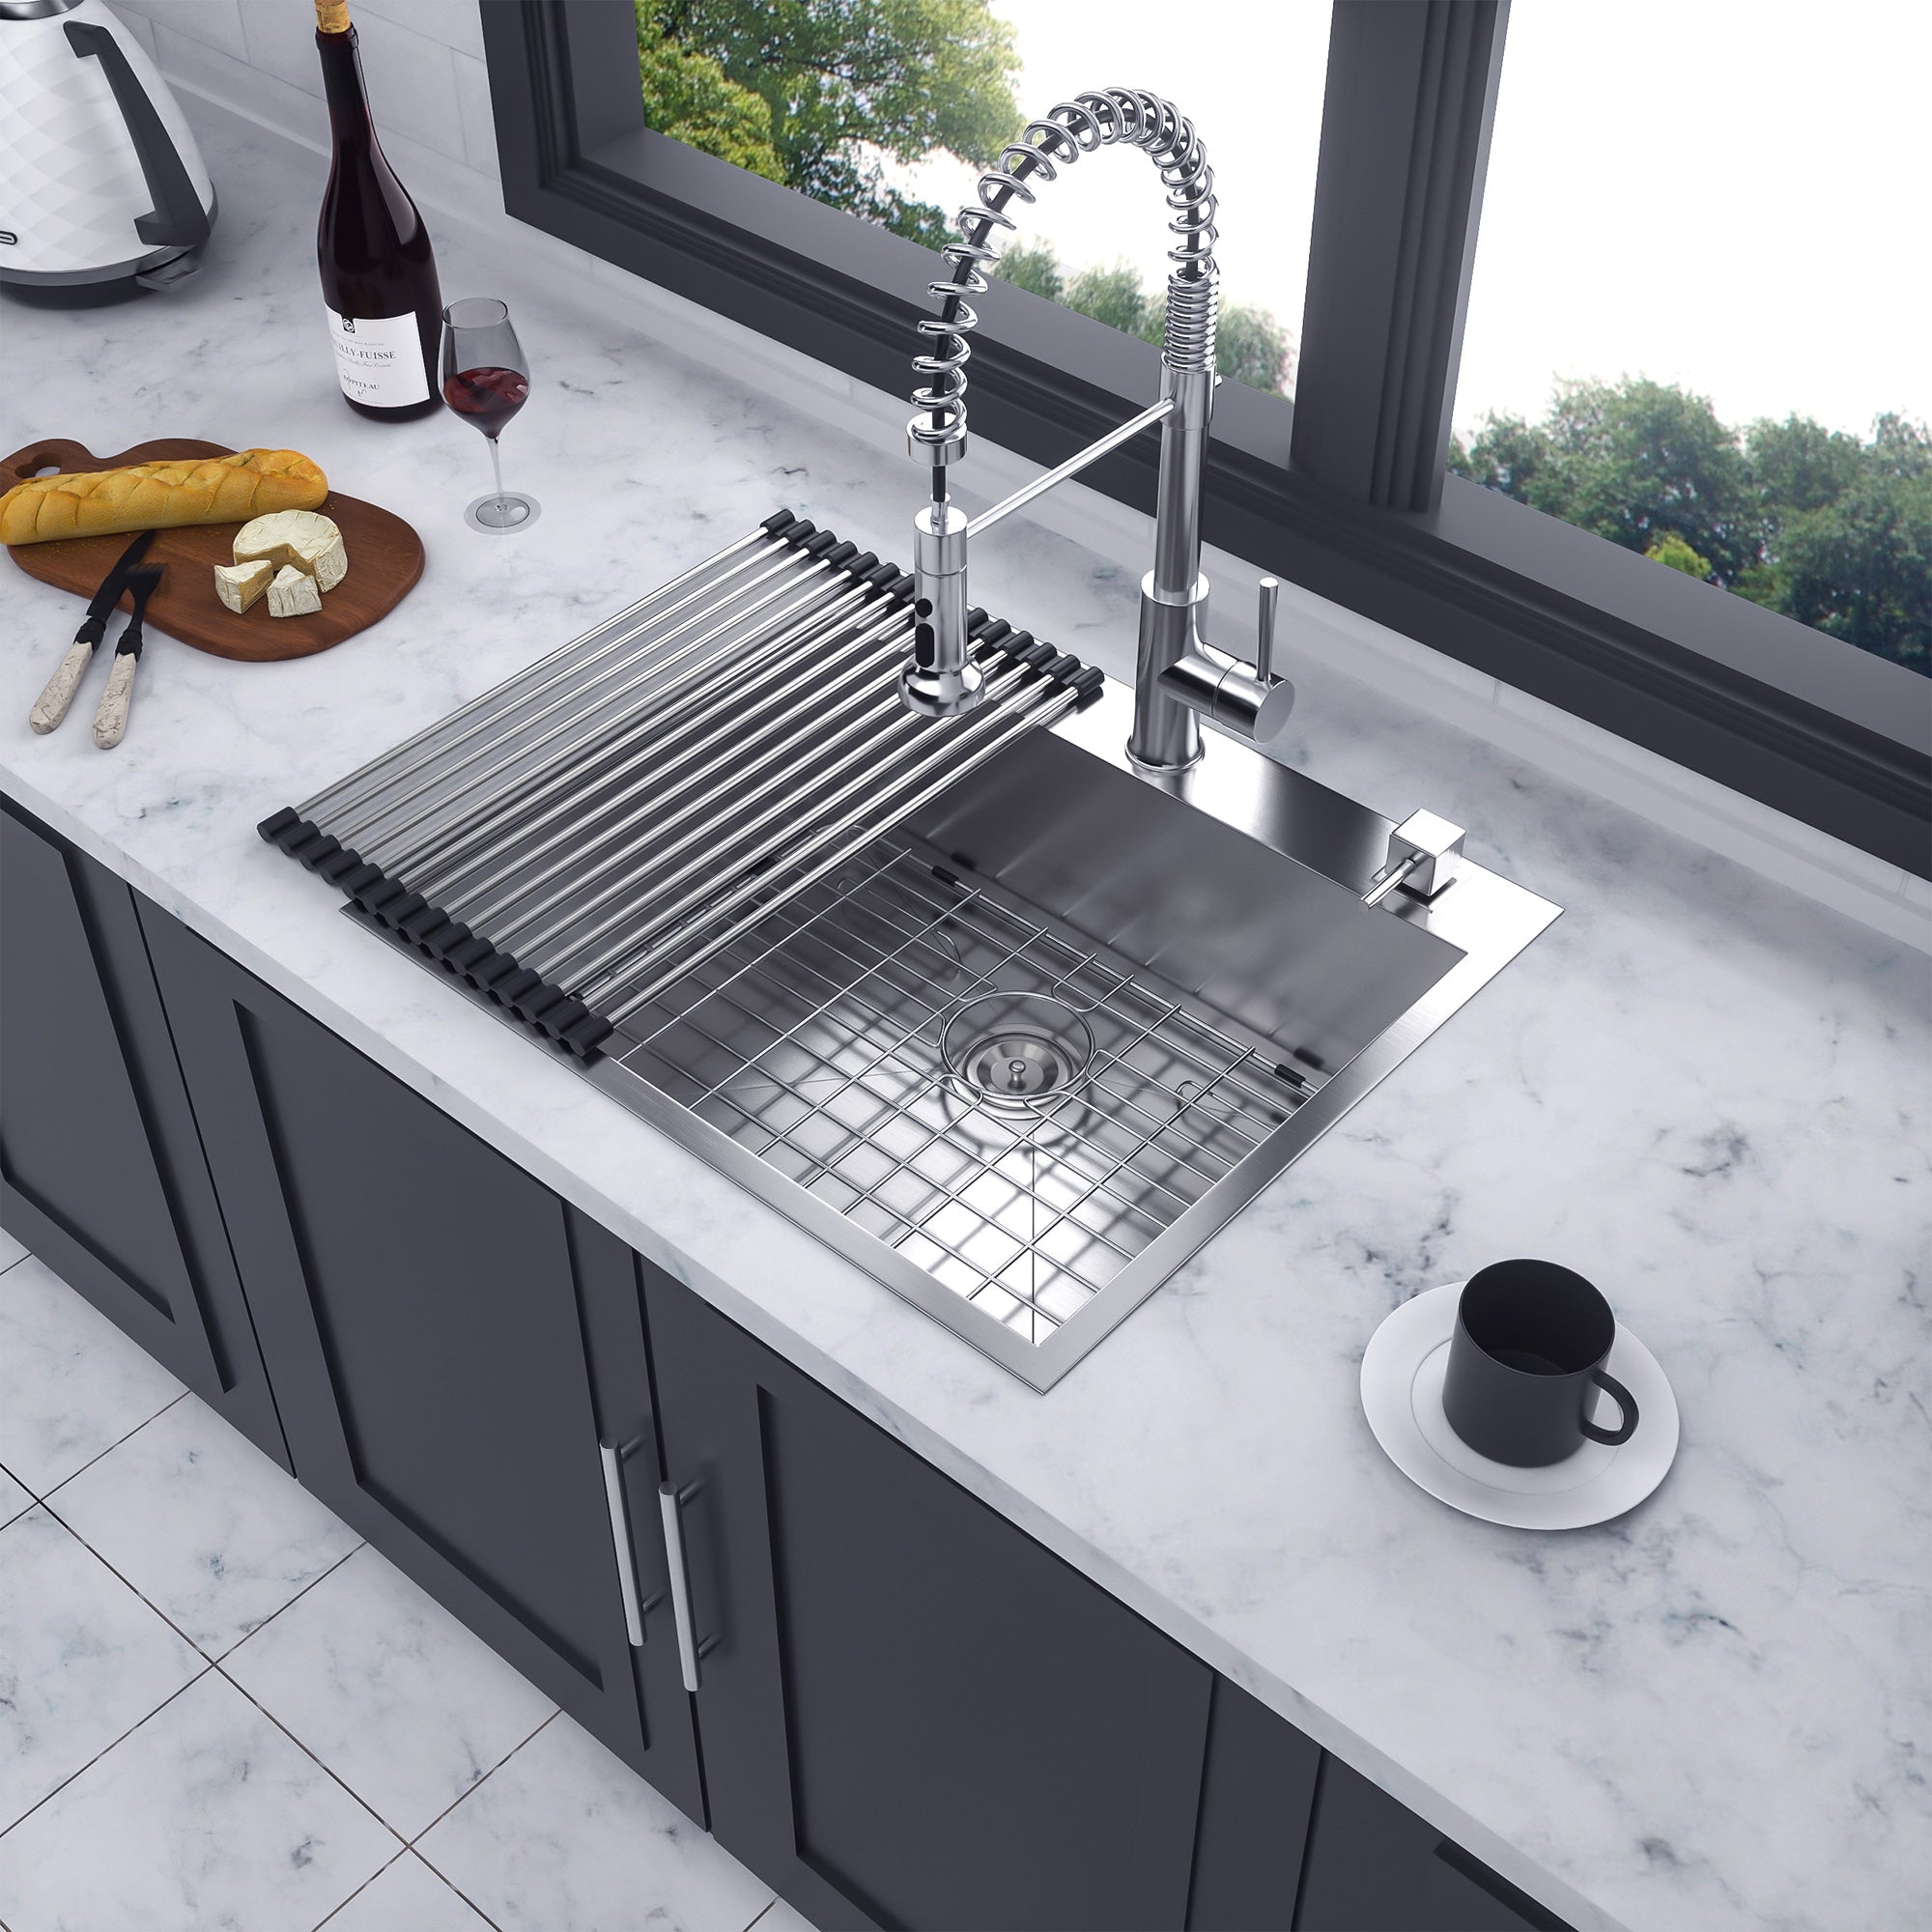 Drop-in Single Bowl Stainless Steel Kitchen Sink RX-SS14